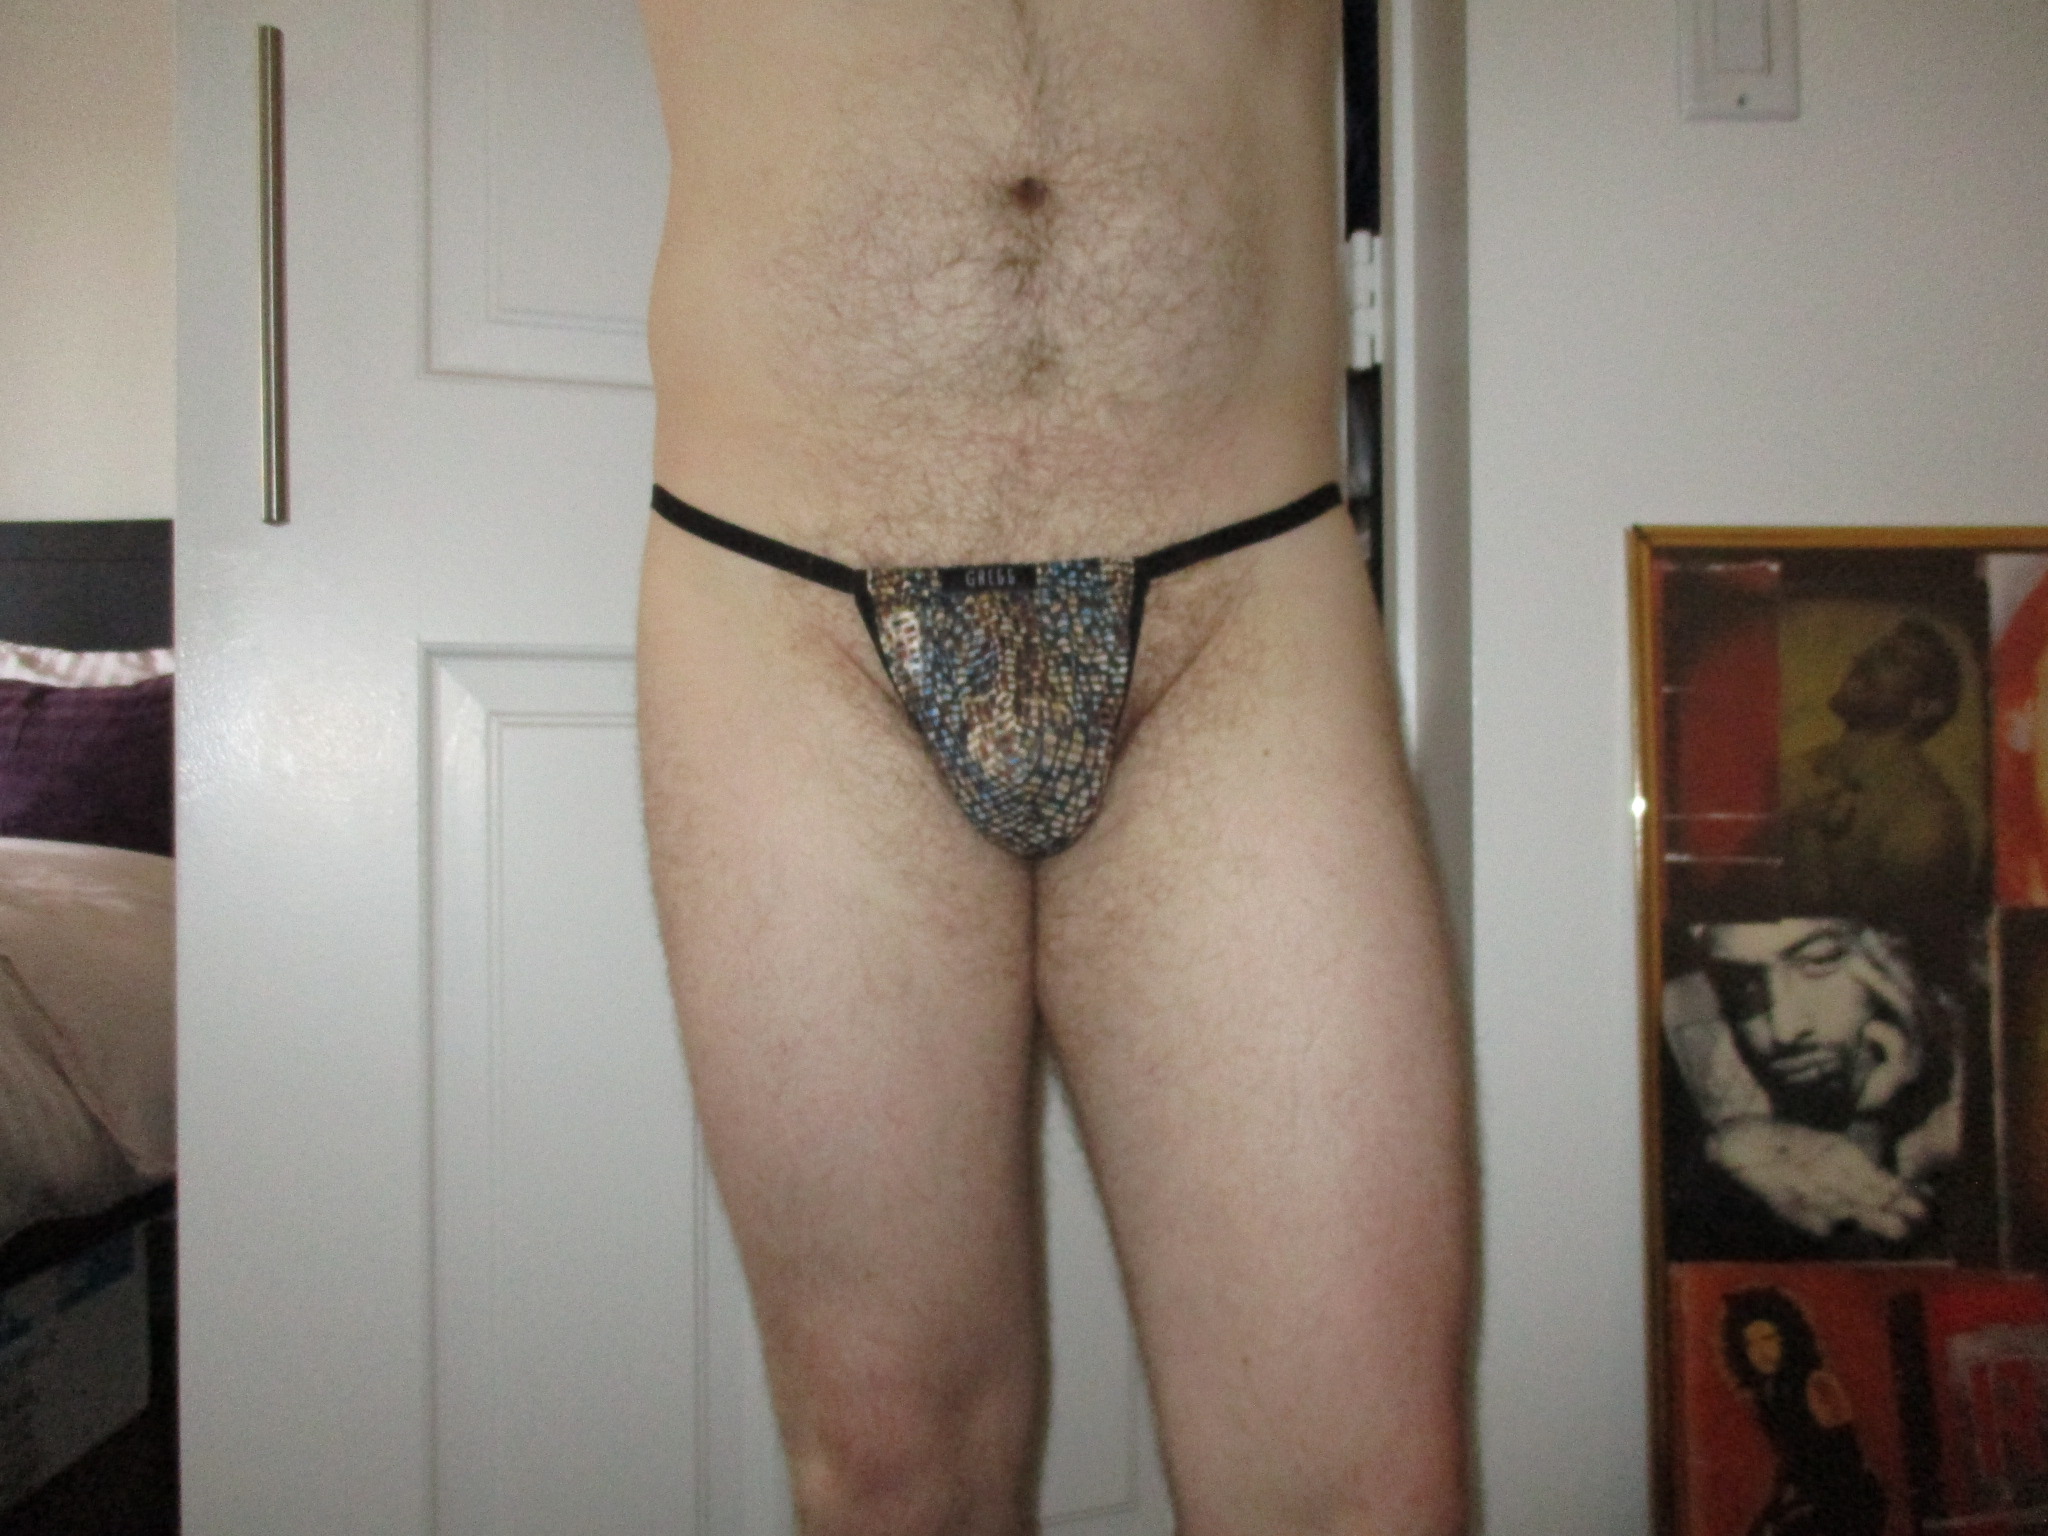 G-String from Gregg Homme that doesn’t make the cut…